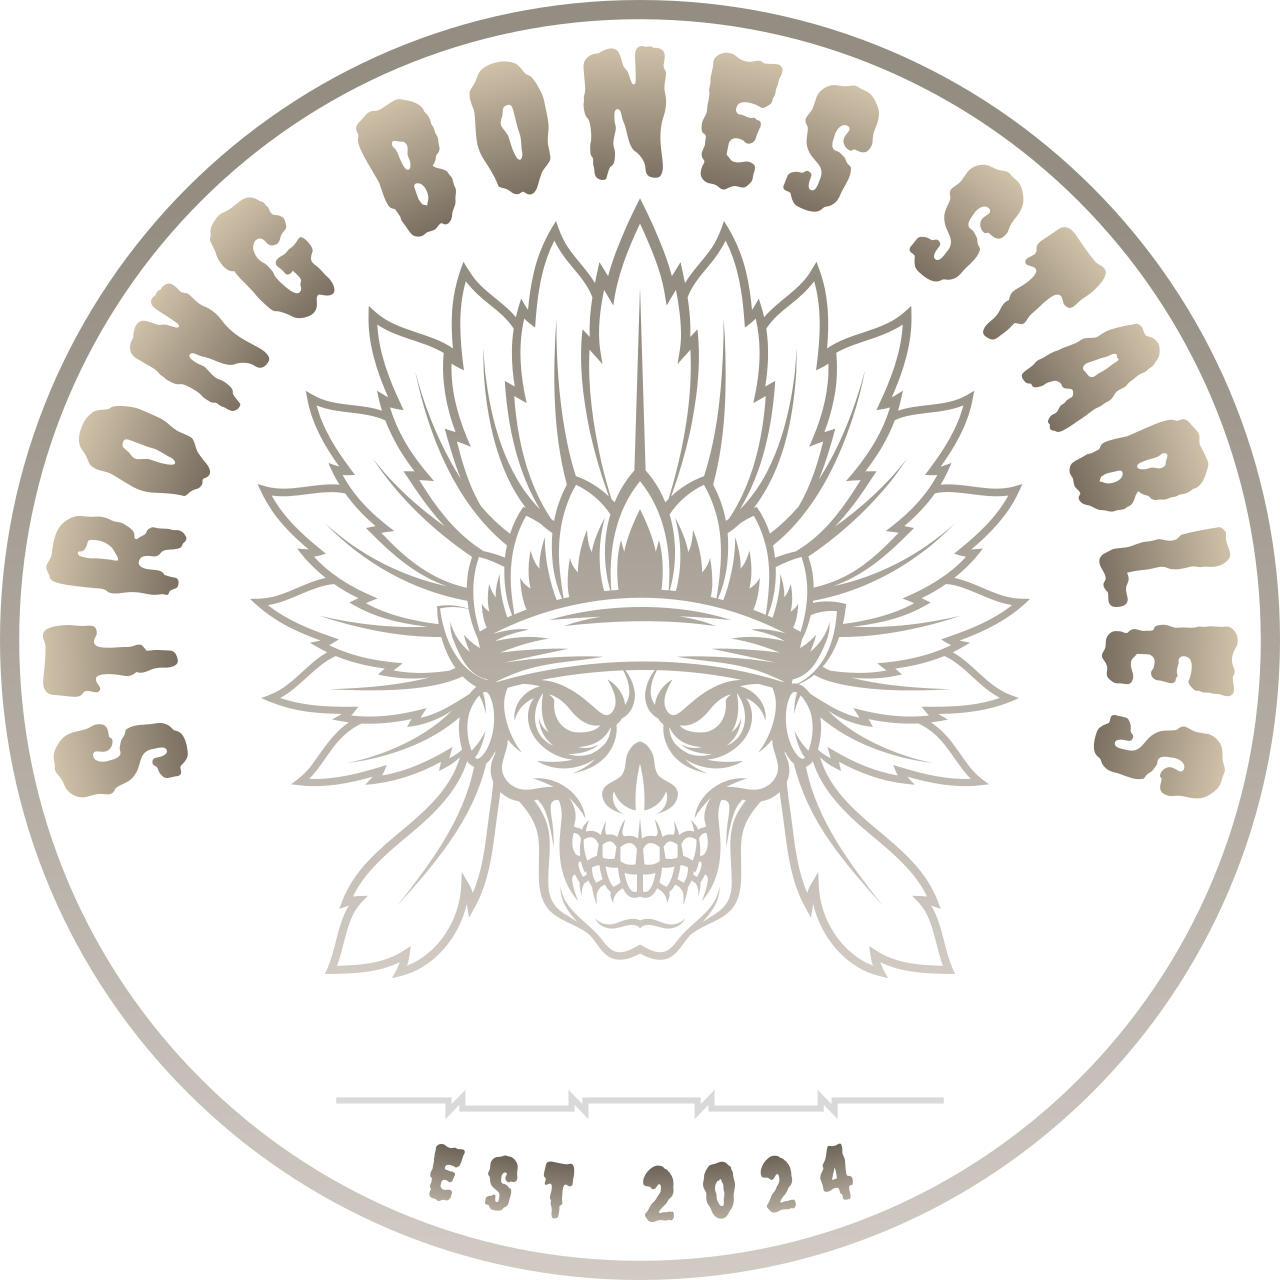 Strong Bones Stables's logo